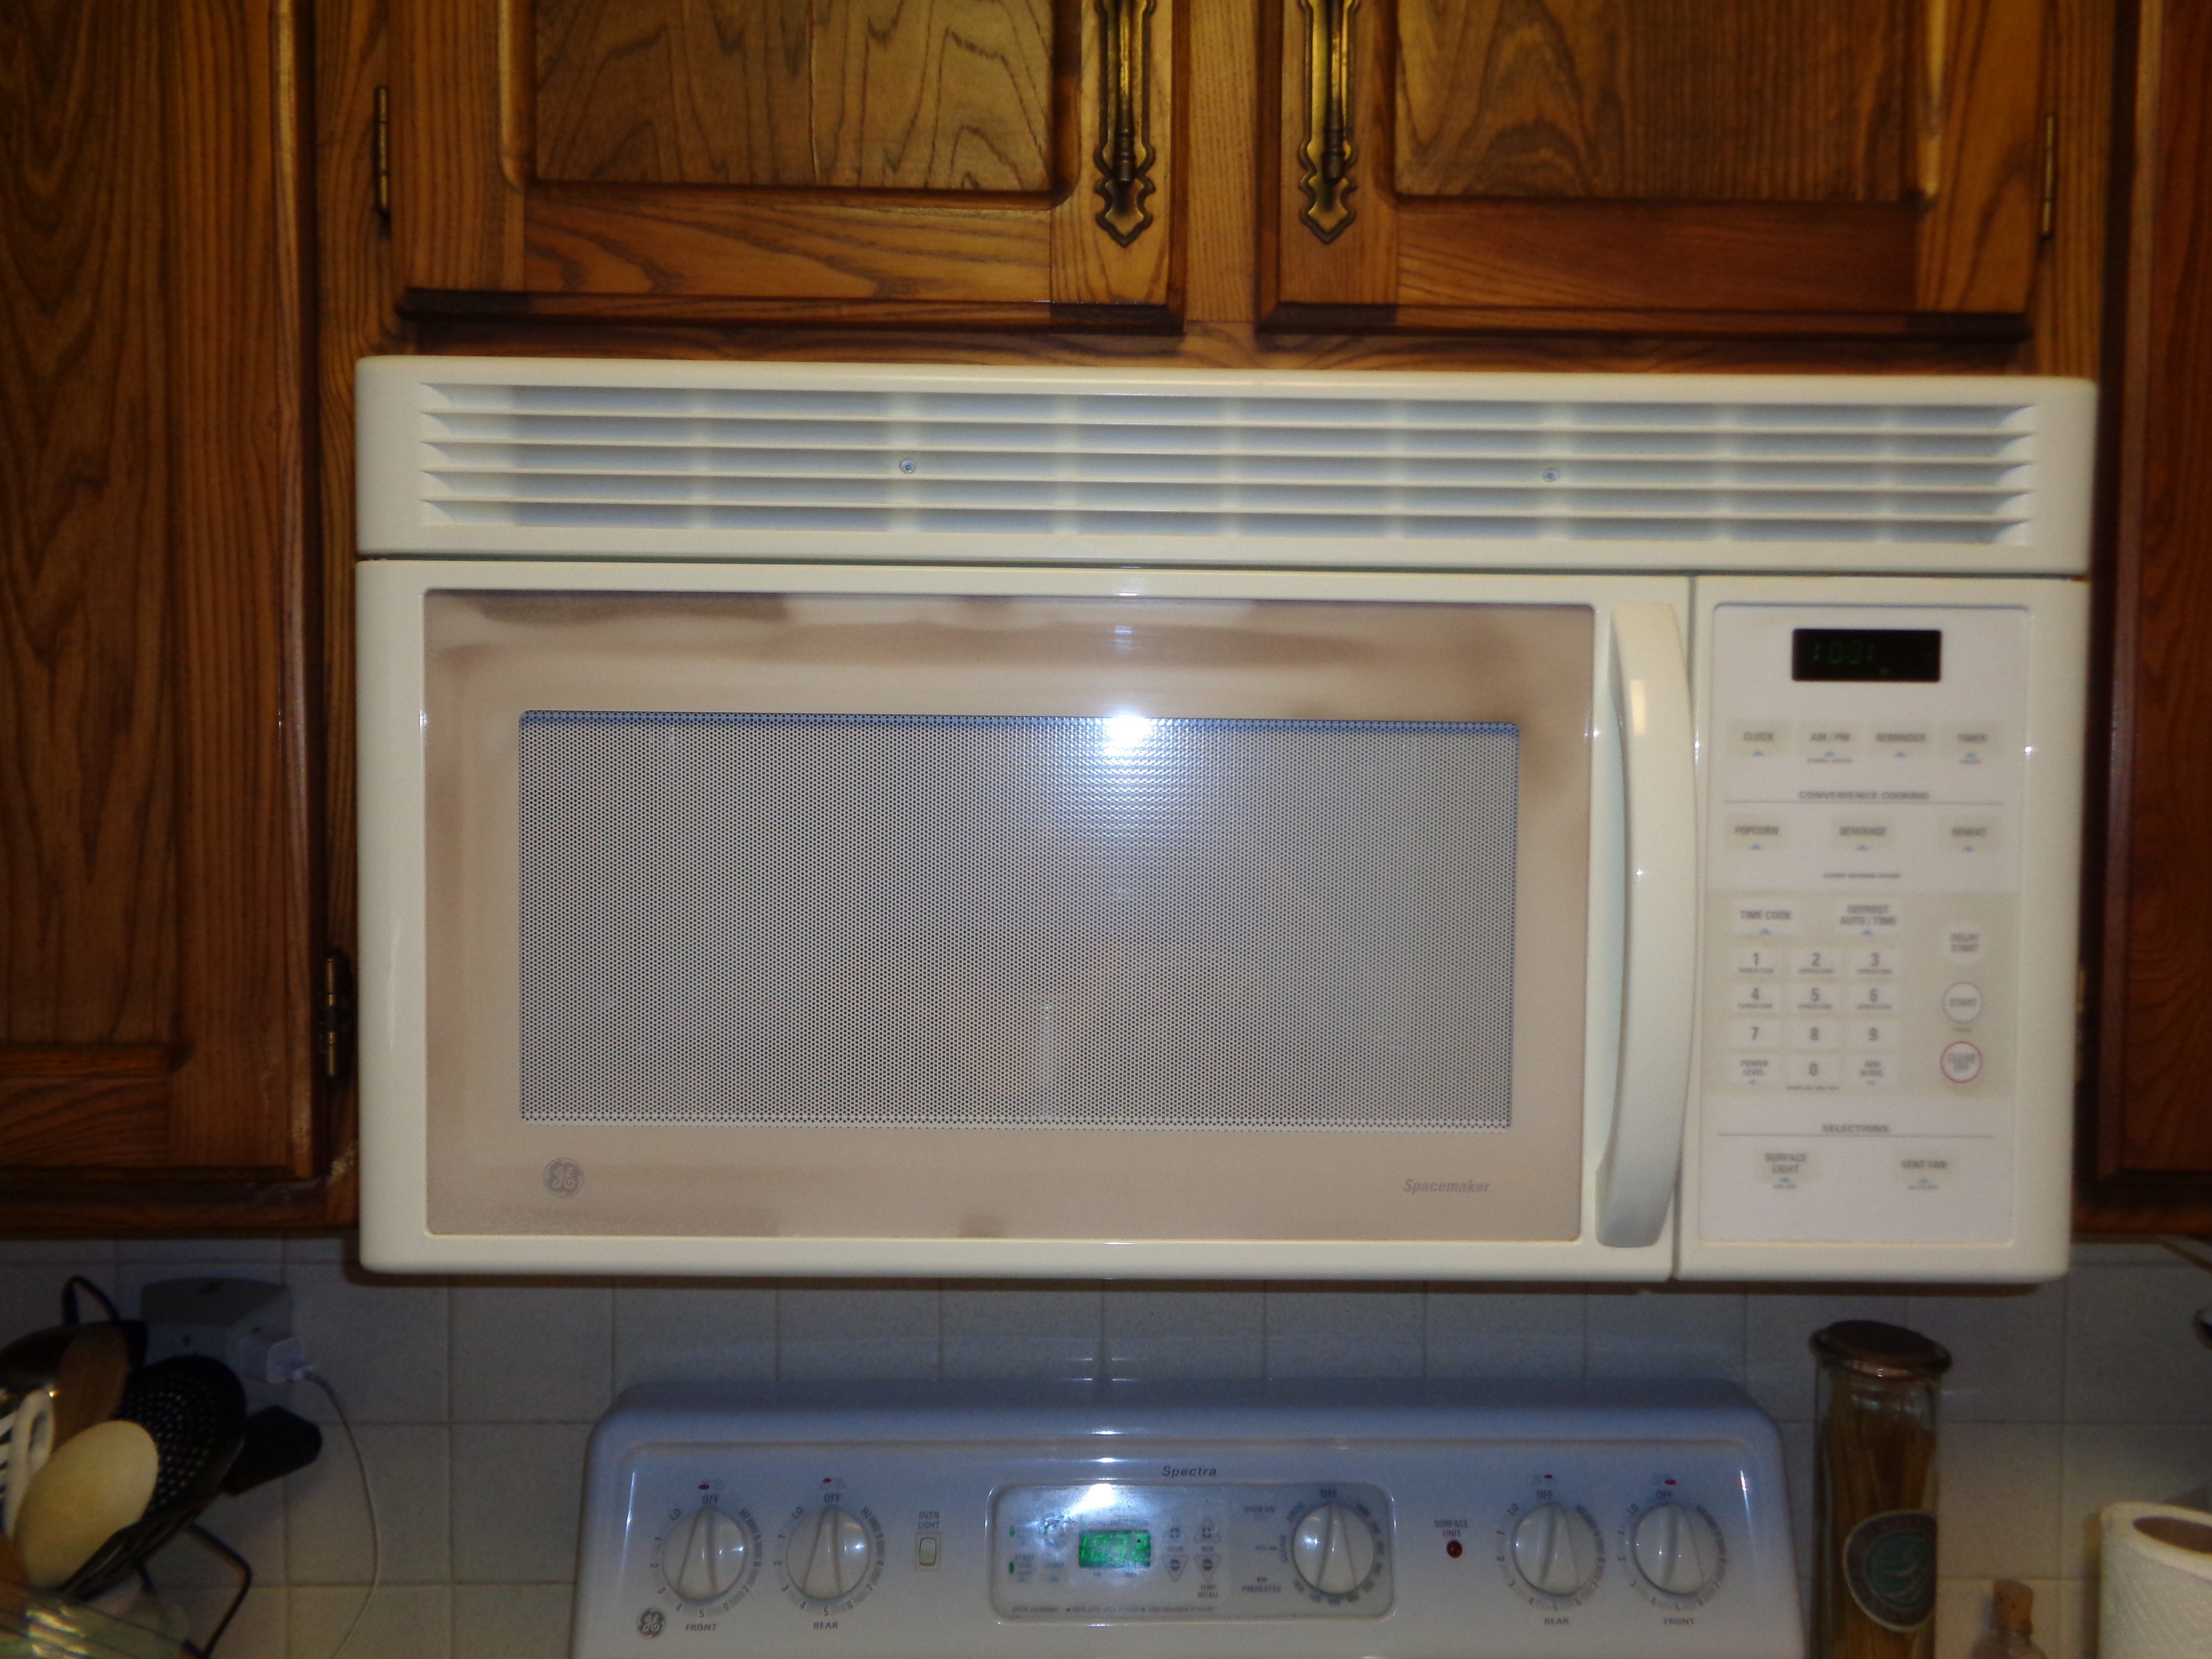 Top 959 Complaints and Reviews about GE Microwave Ovens